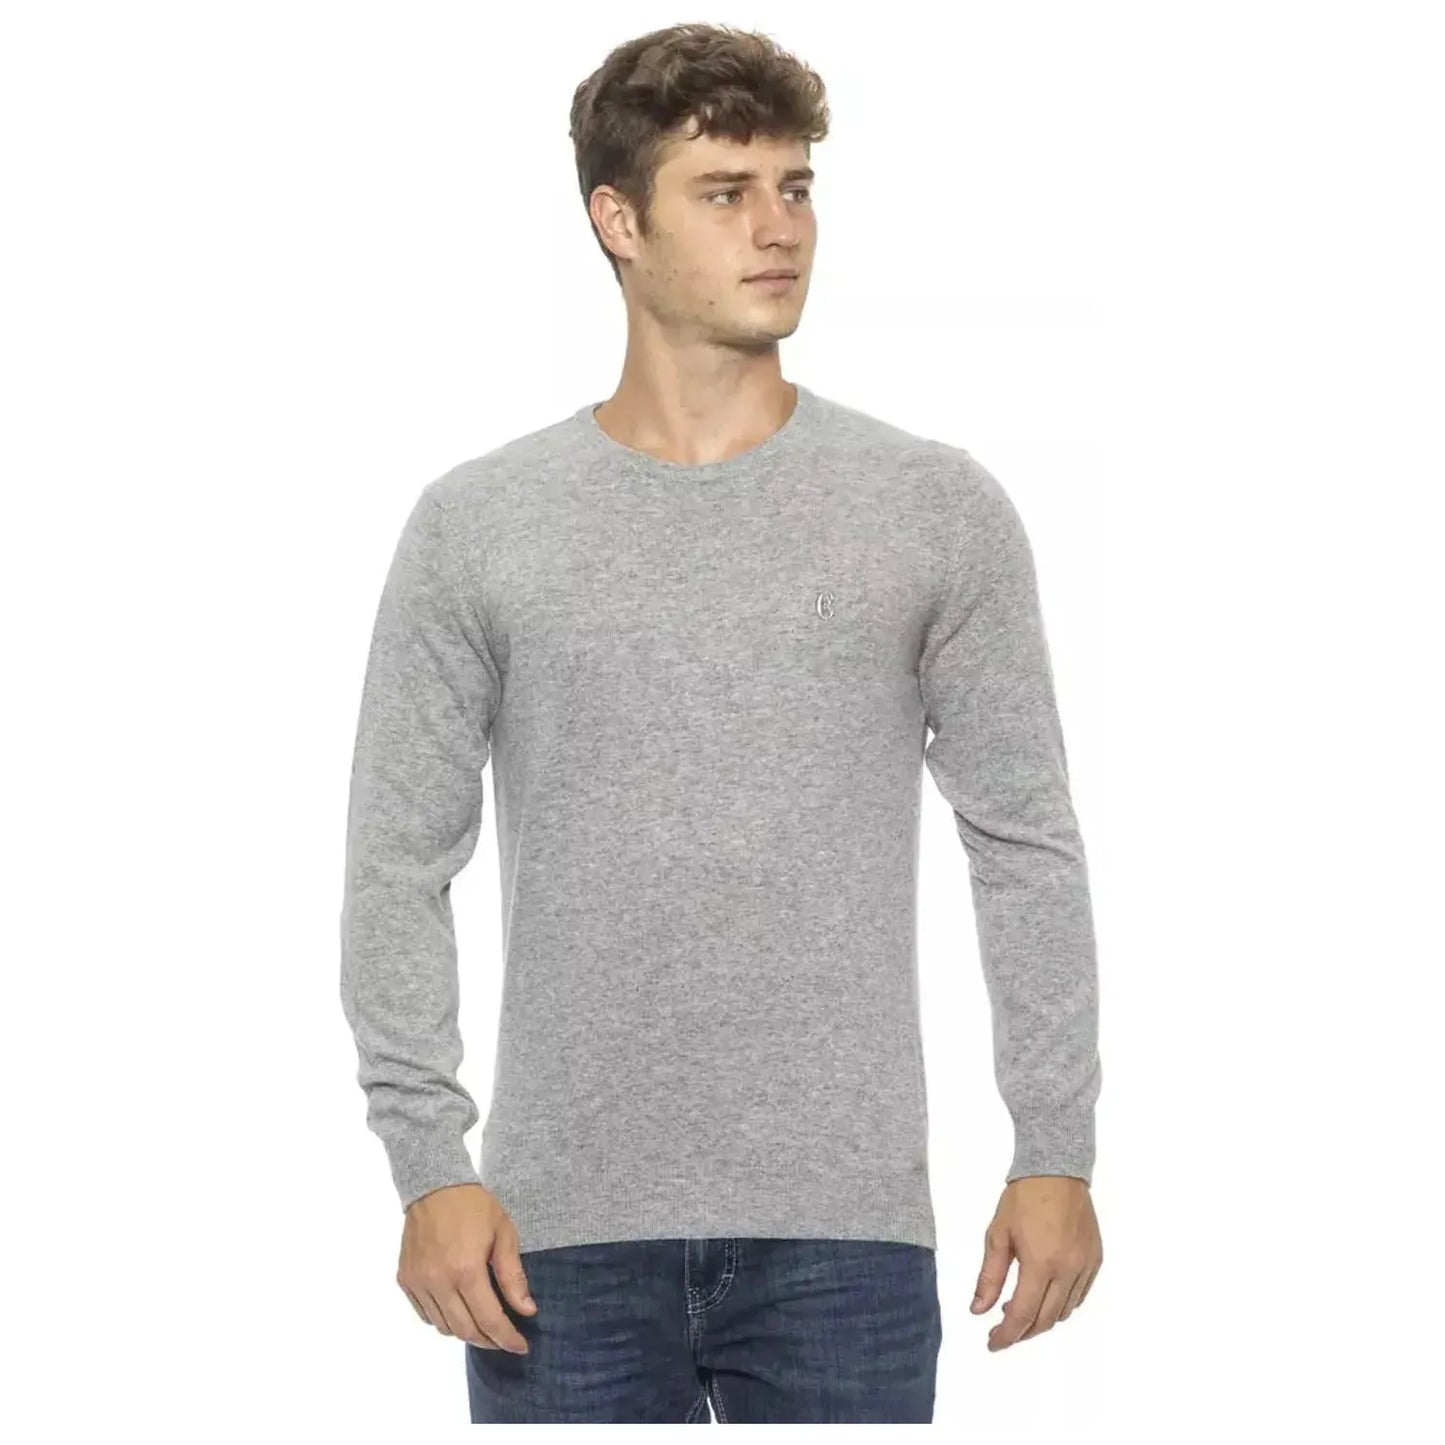 Conte of Florence | Silver Wool Sweater | McRichard Designer Brands